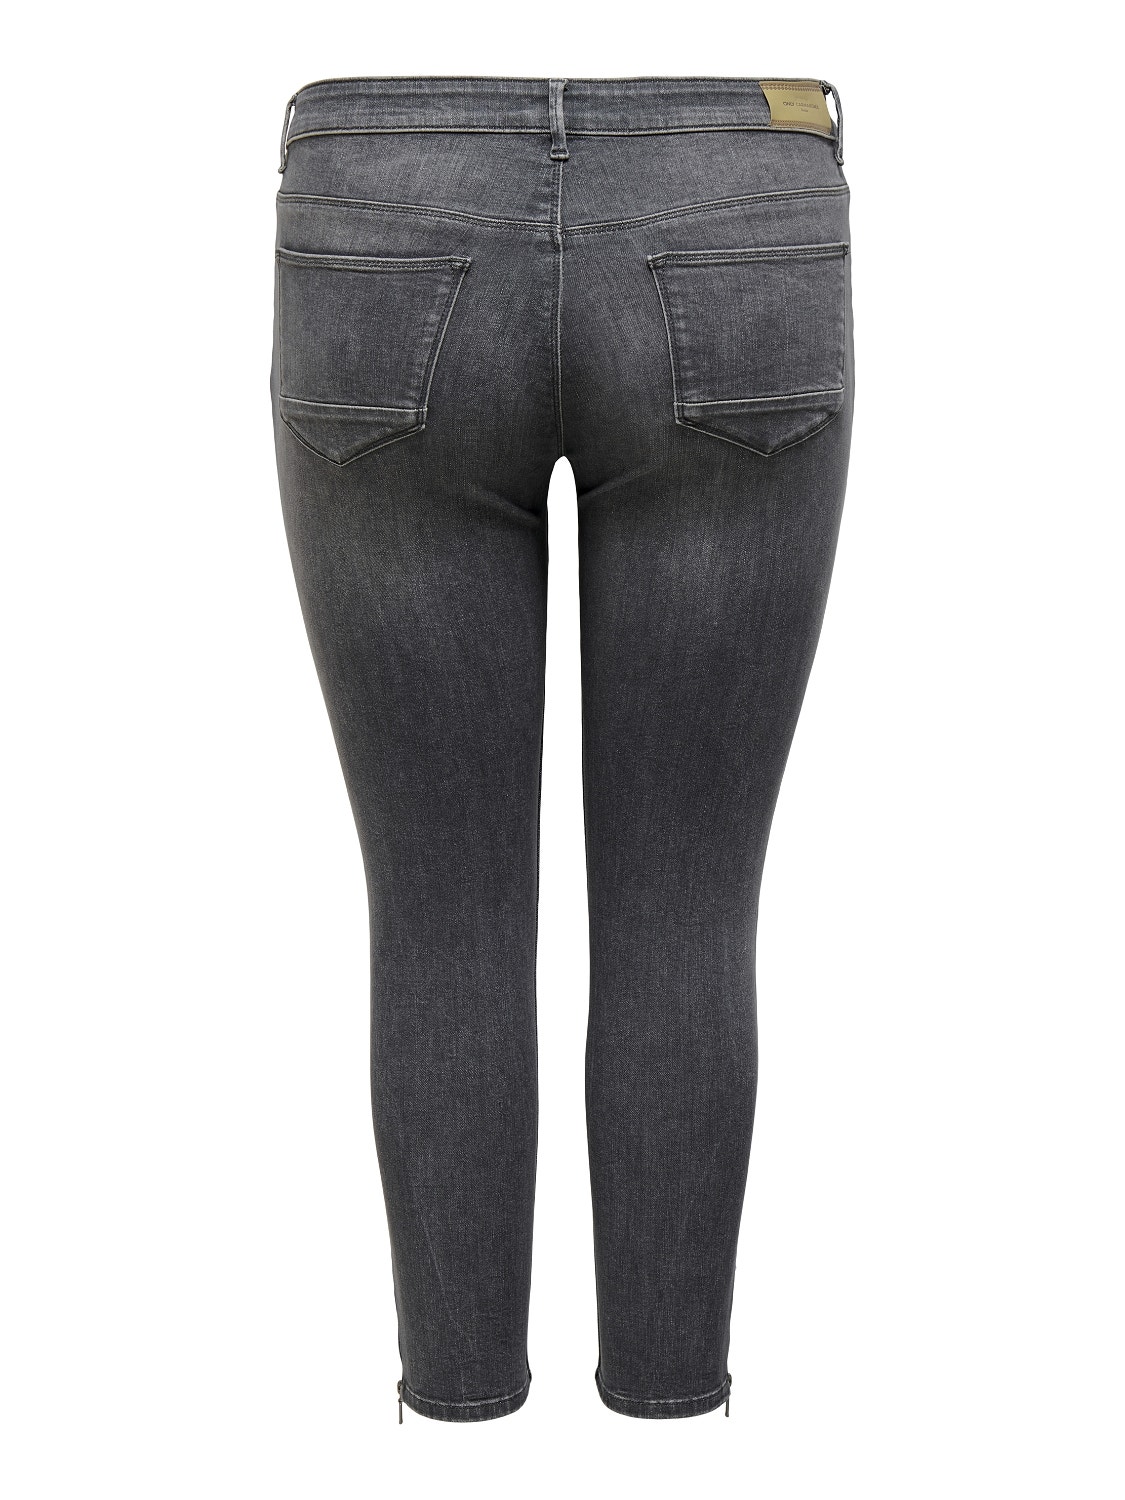 ONLY Jeans Skinny Fit Taille moyenne Curve -Medium Grey Denim - 15259954